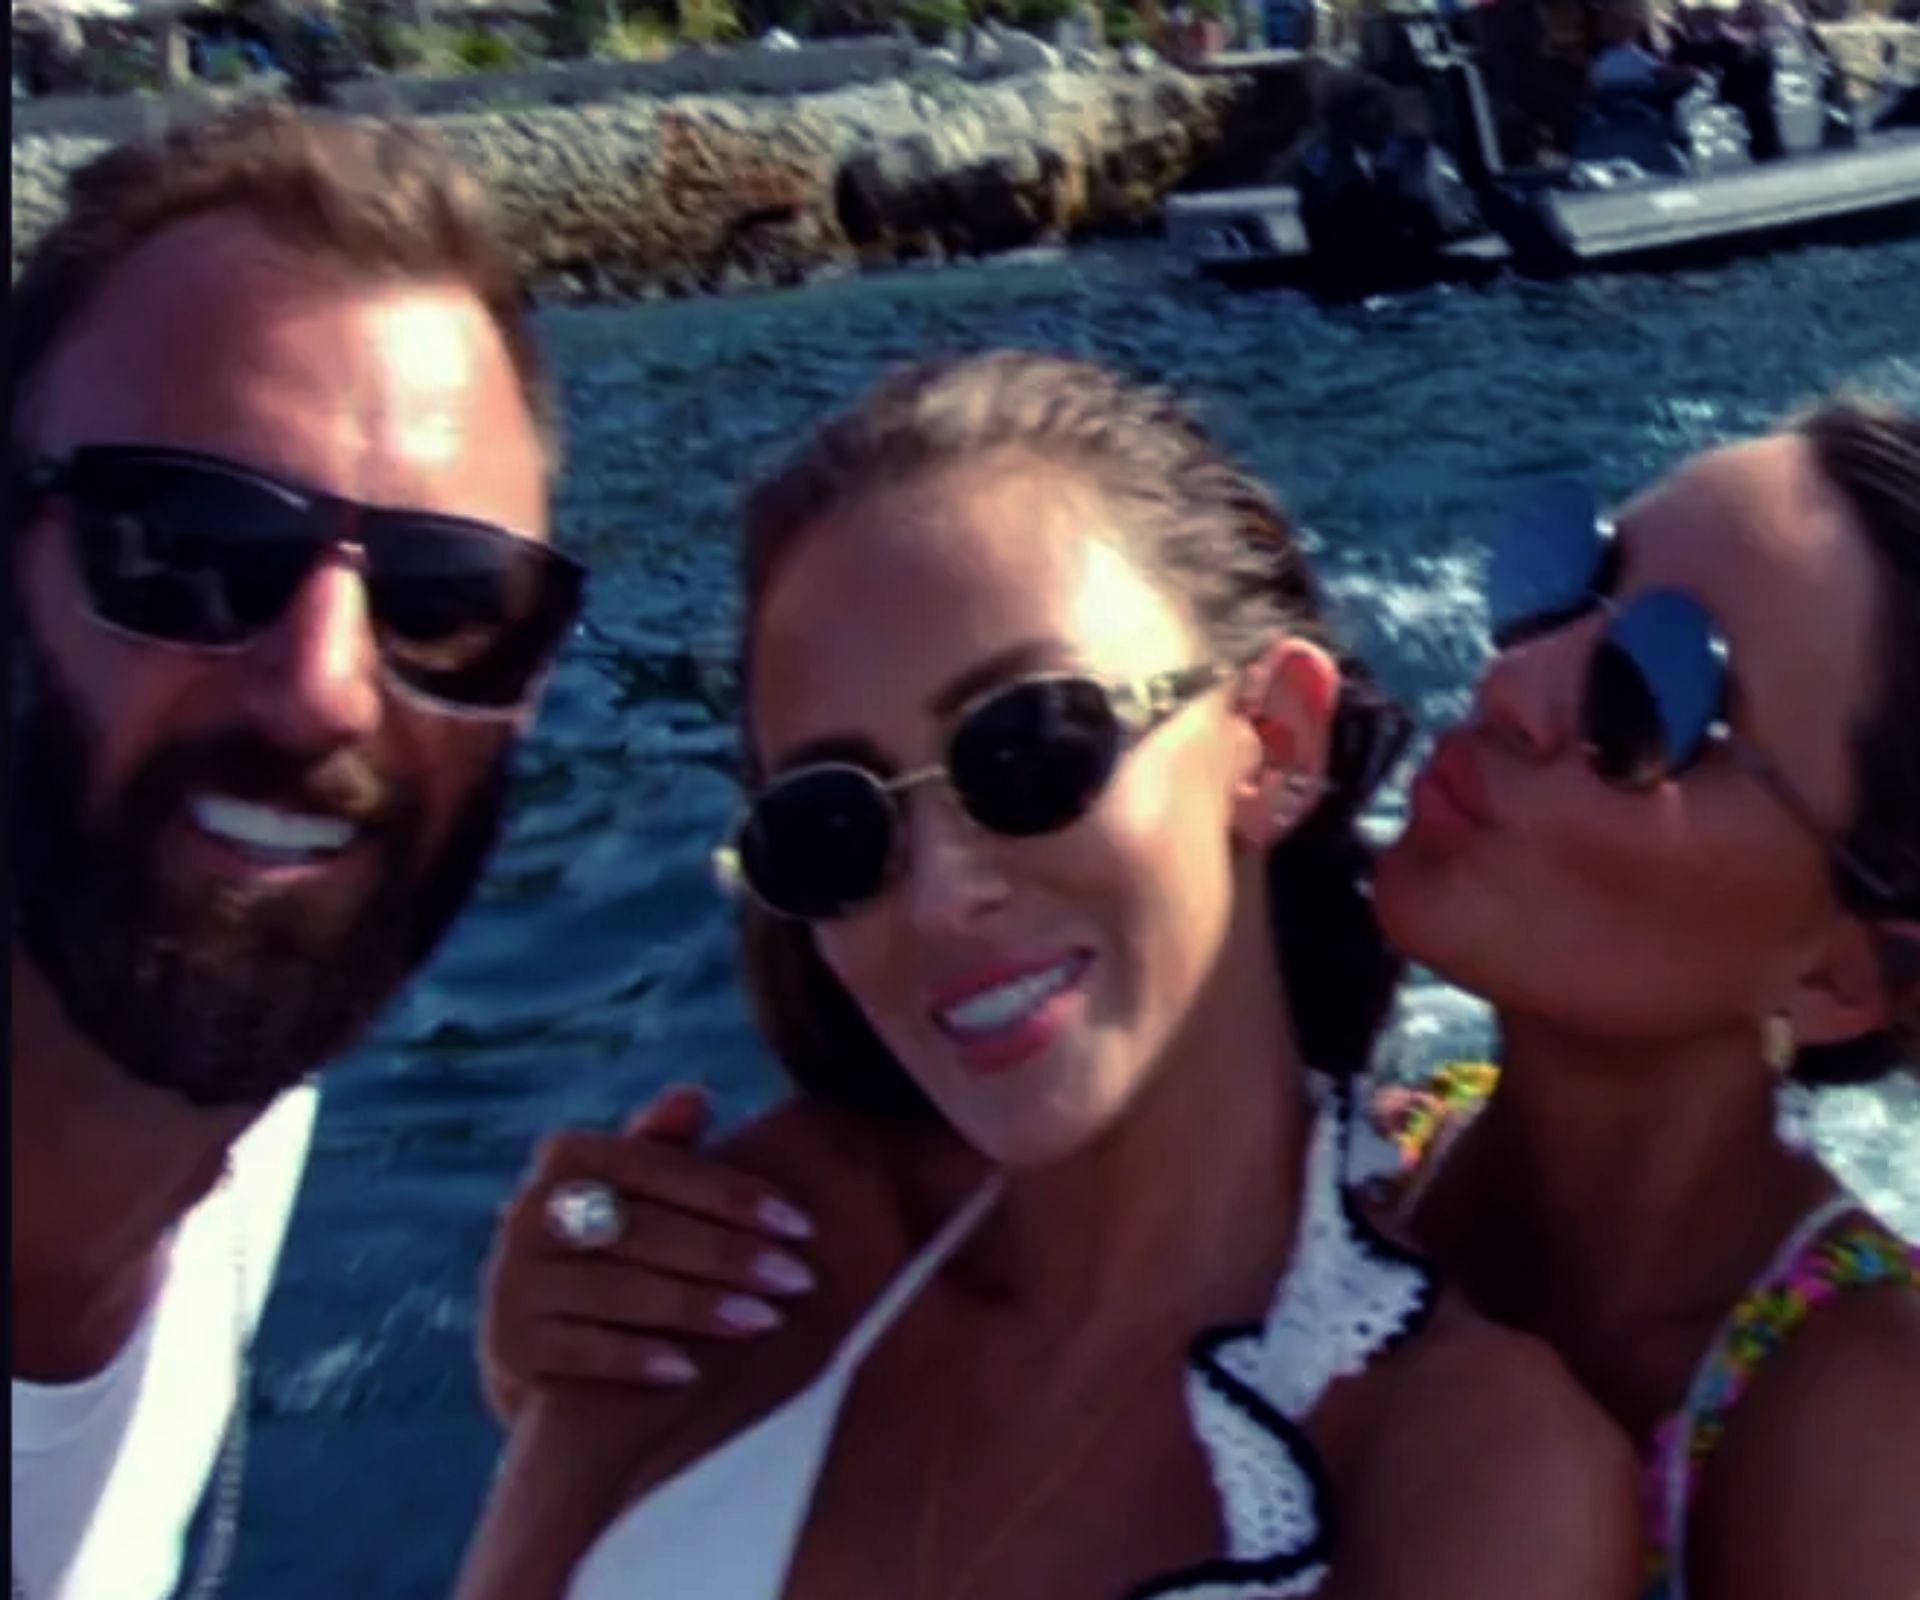 Dustin Johnson is on vacations with his wife and friends (Image via Instagram @PaulinaGretzky).